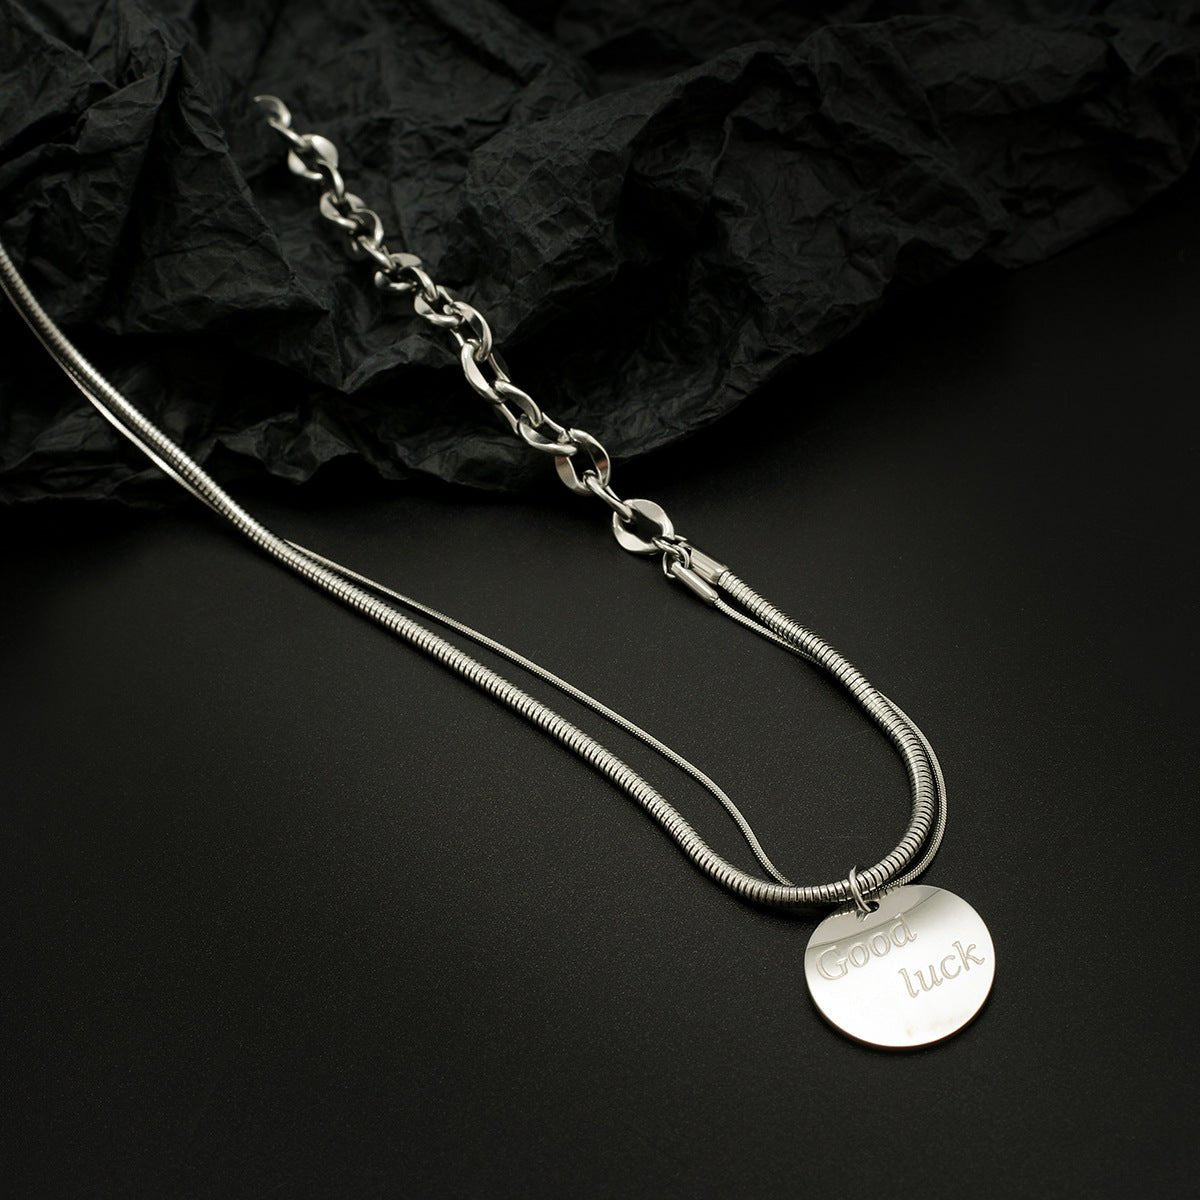 Trendy double-layer stacked wear with round design versatile pendant necklace - JuVons